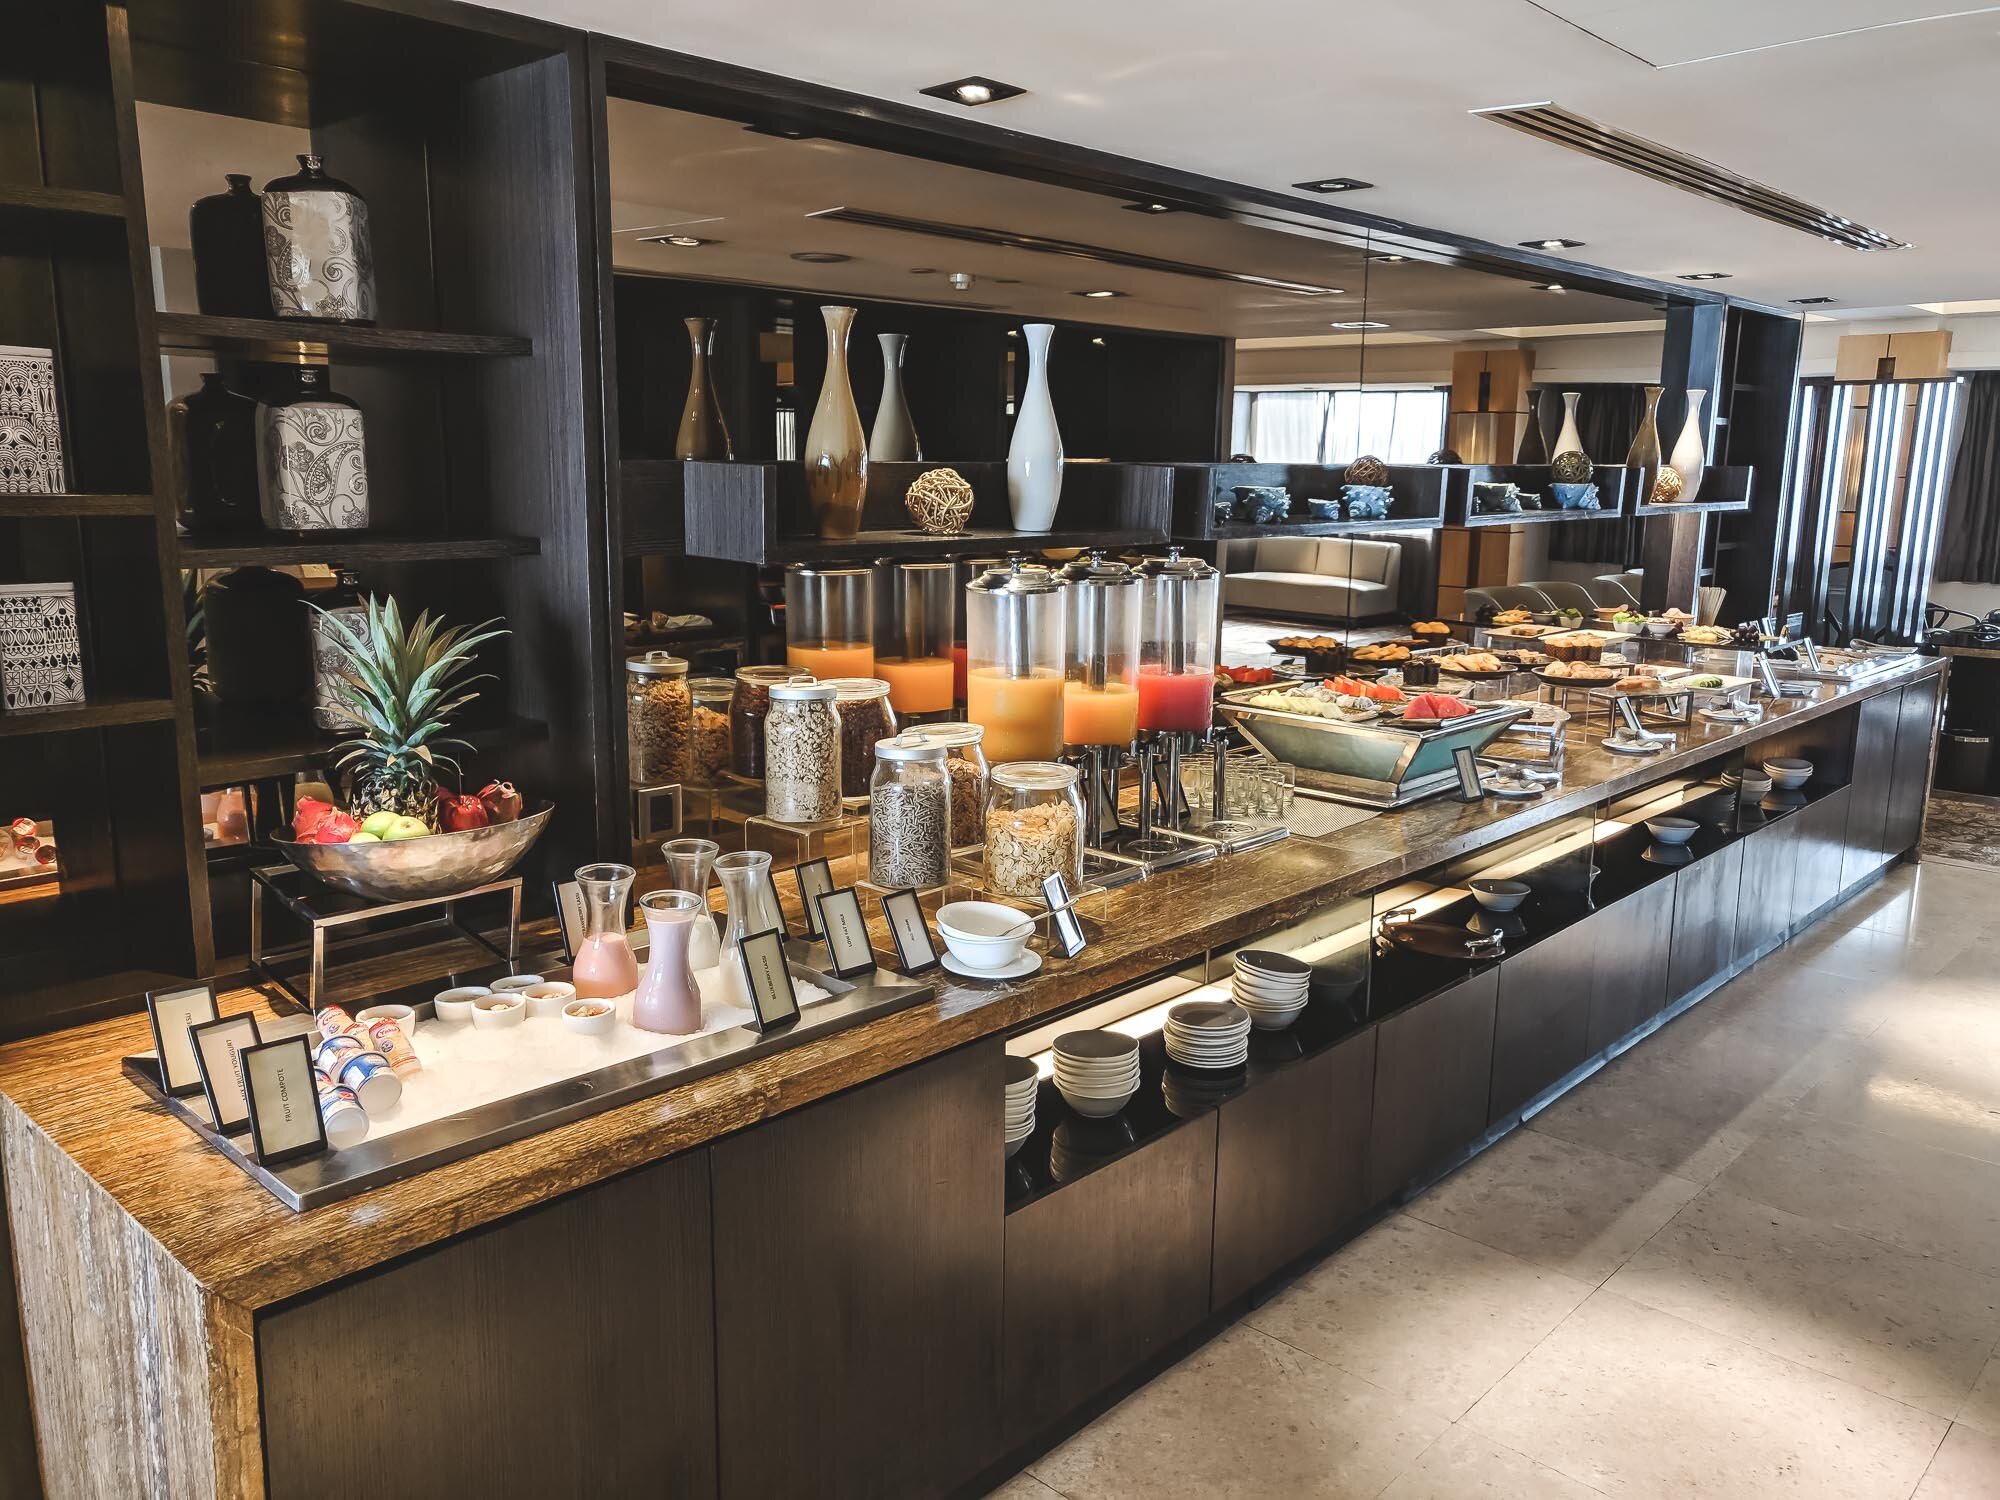 Breakfast spread in the Executive Lounge